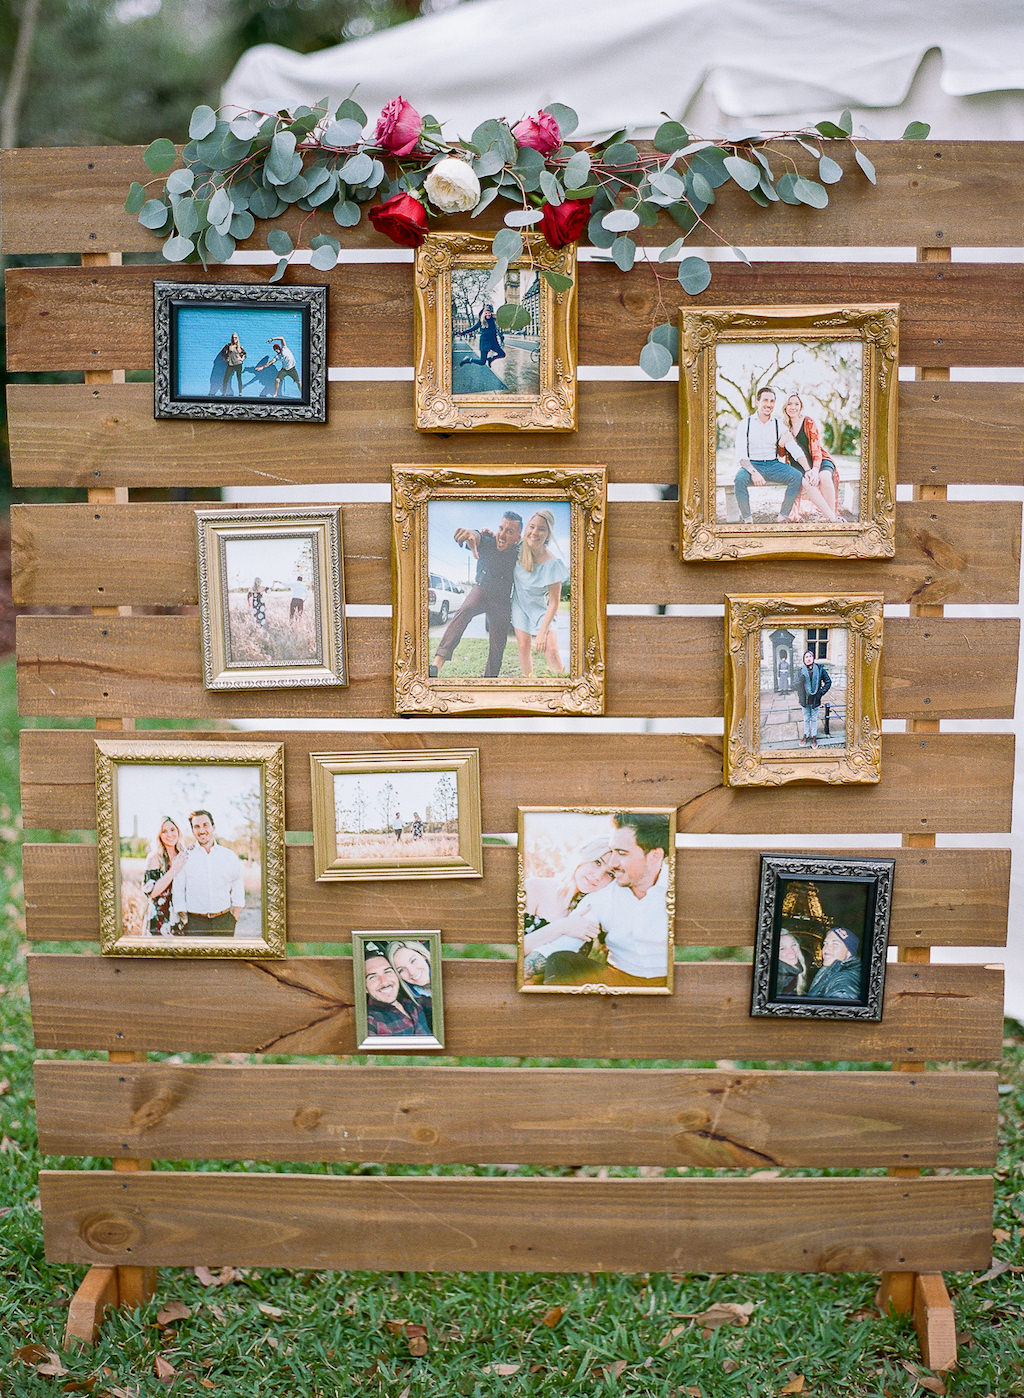 Boho Chic Vintage Inspired Lakeland Florida Outdoor Wedding Decor, Wooden Pallet with Framed Photographs and Red, White, Pink and Greenery Floral Accent